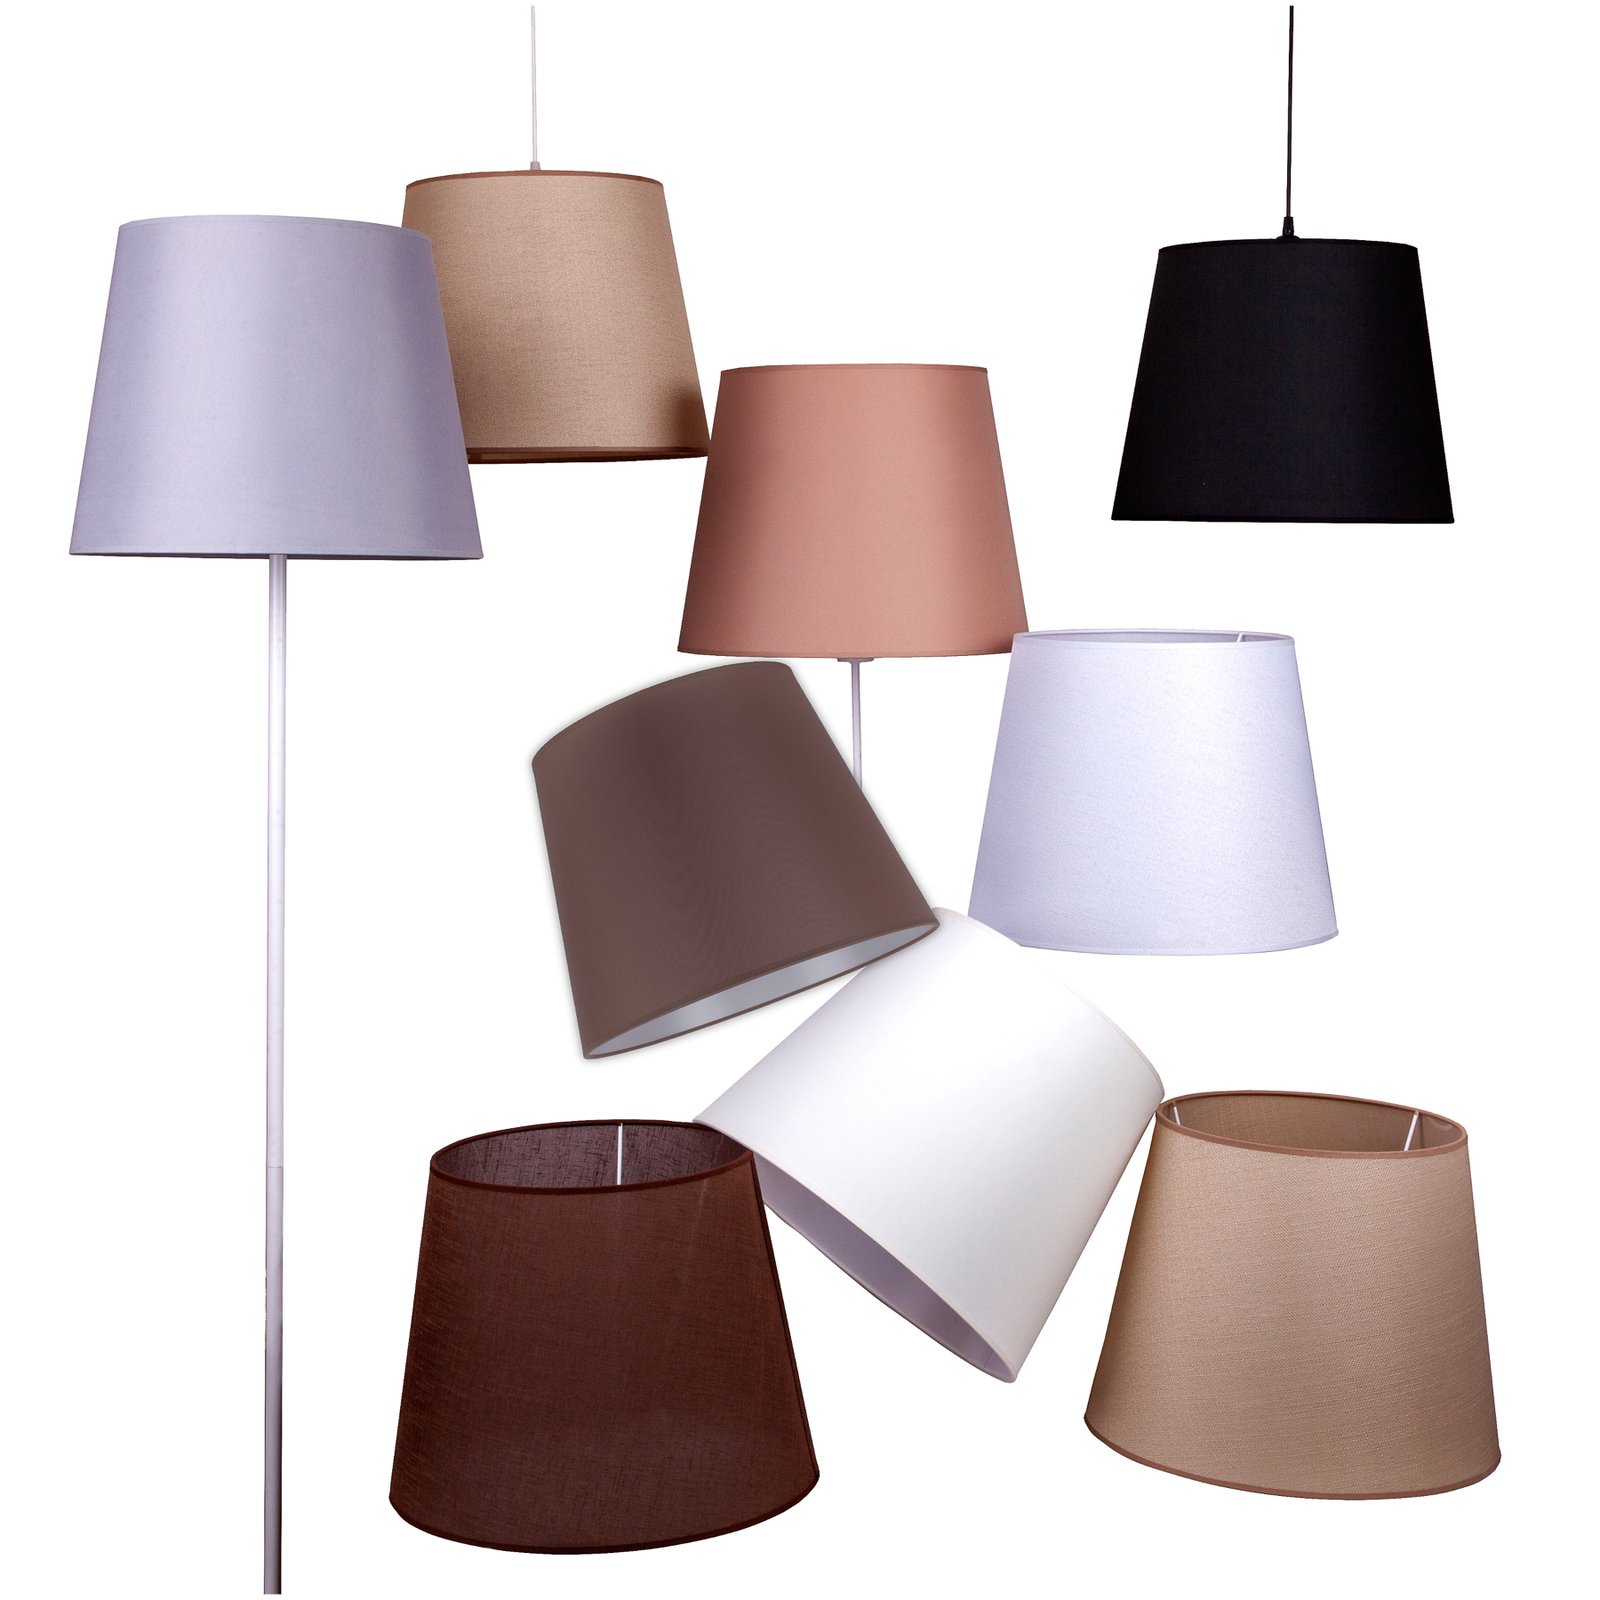 Classic L lampshade for floor lamps, black